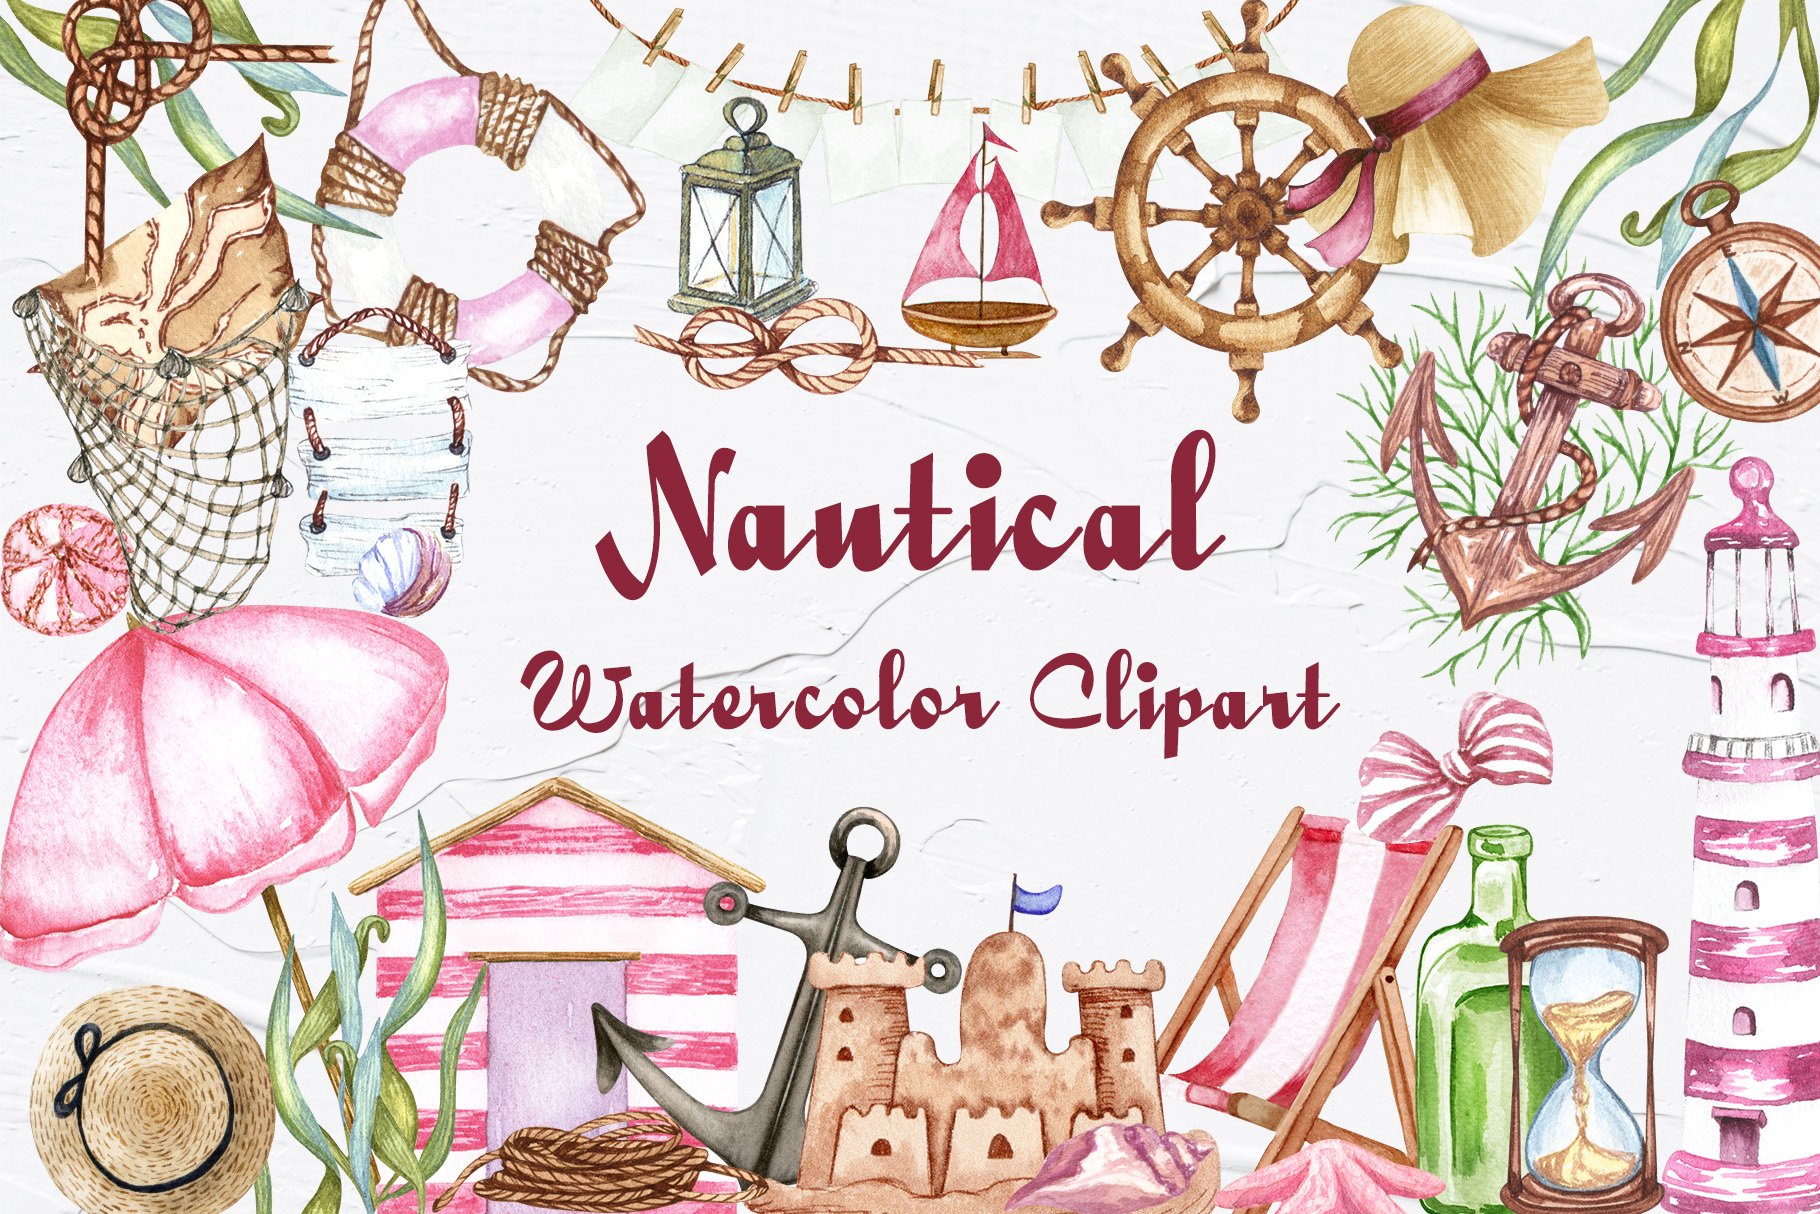 Nautical Watercolor Clipart cover image.